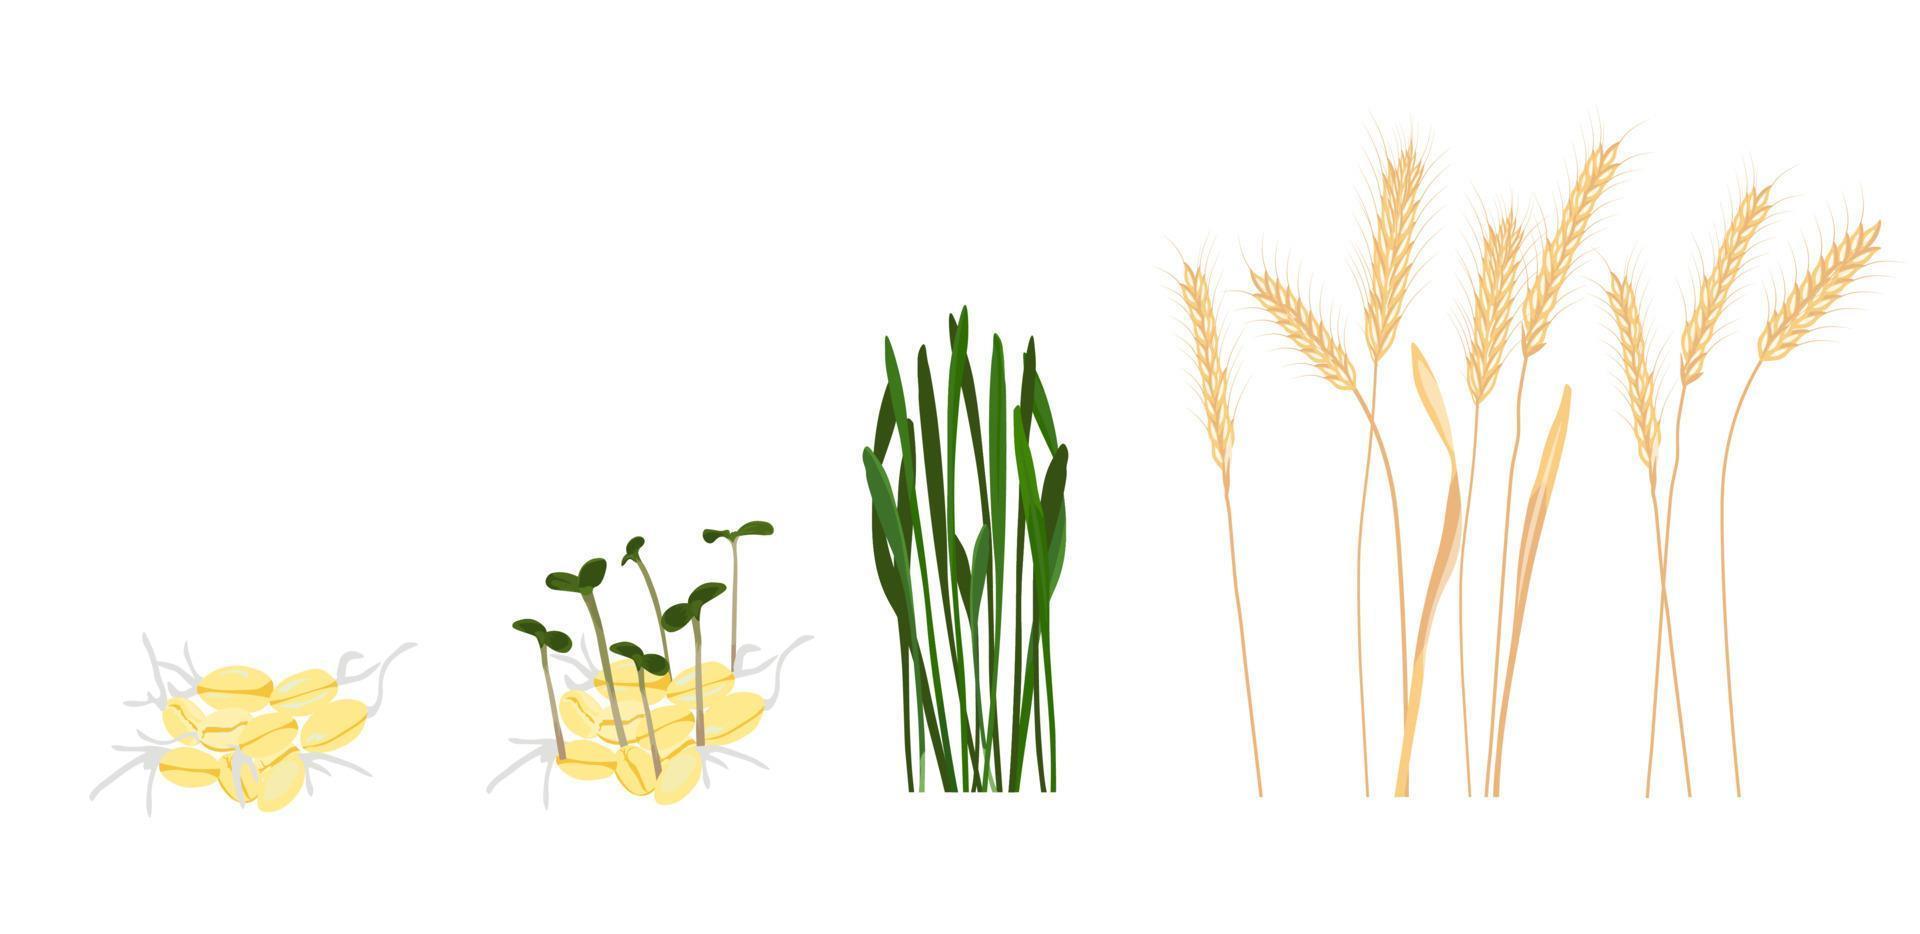 Wheat growth stage vector stock illustration. Cycle of growth of a wheat plant. Isolated on a white background.